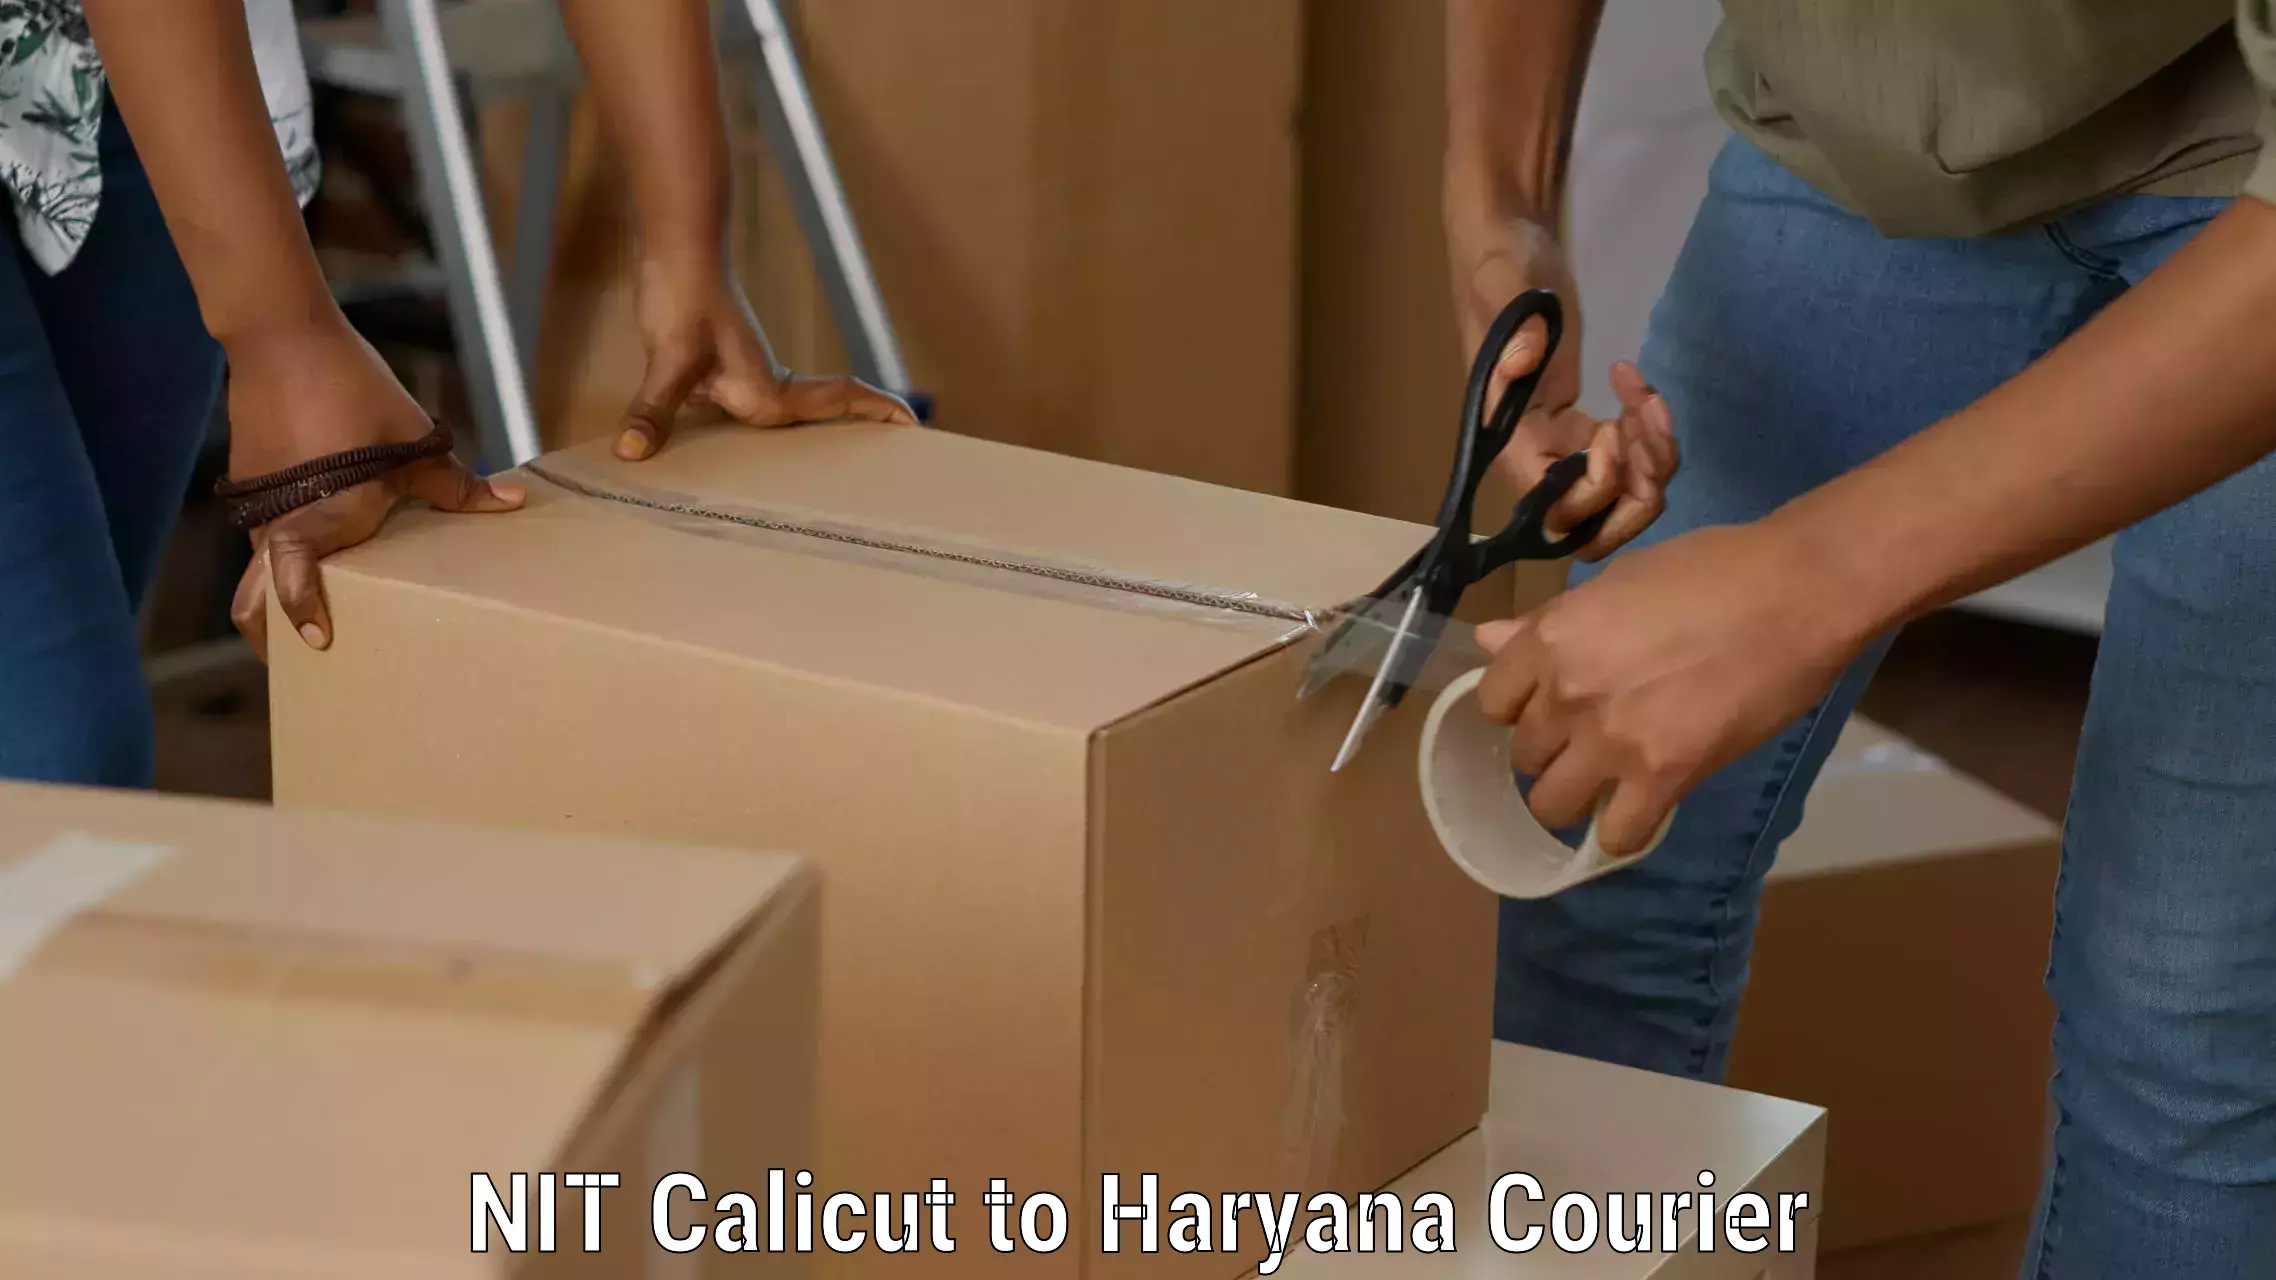 Professional courier handling NIT Calicut to Sonipat